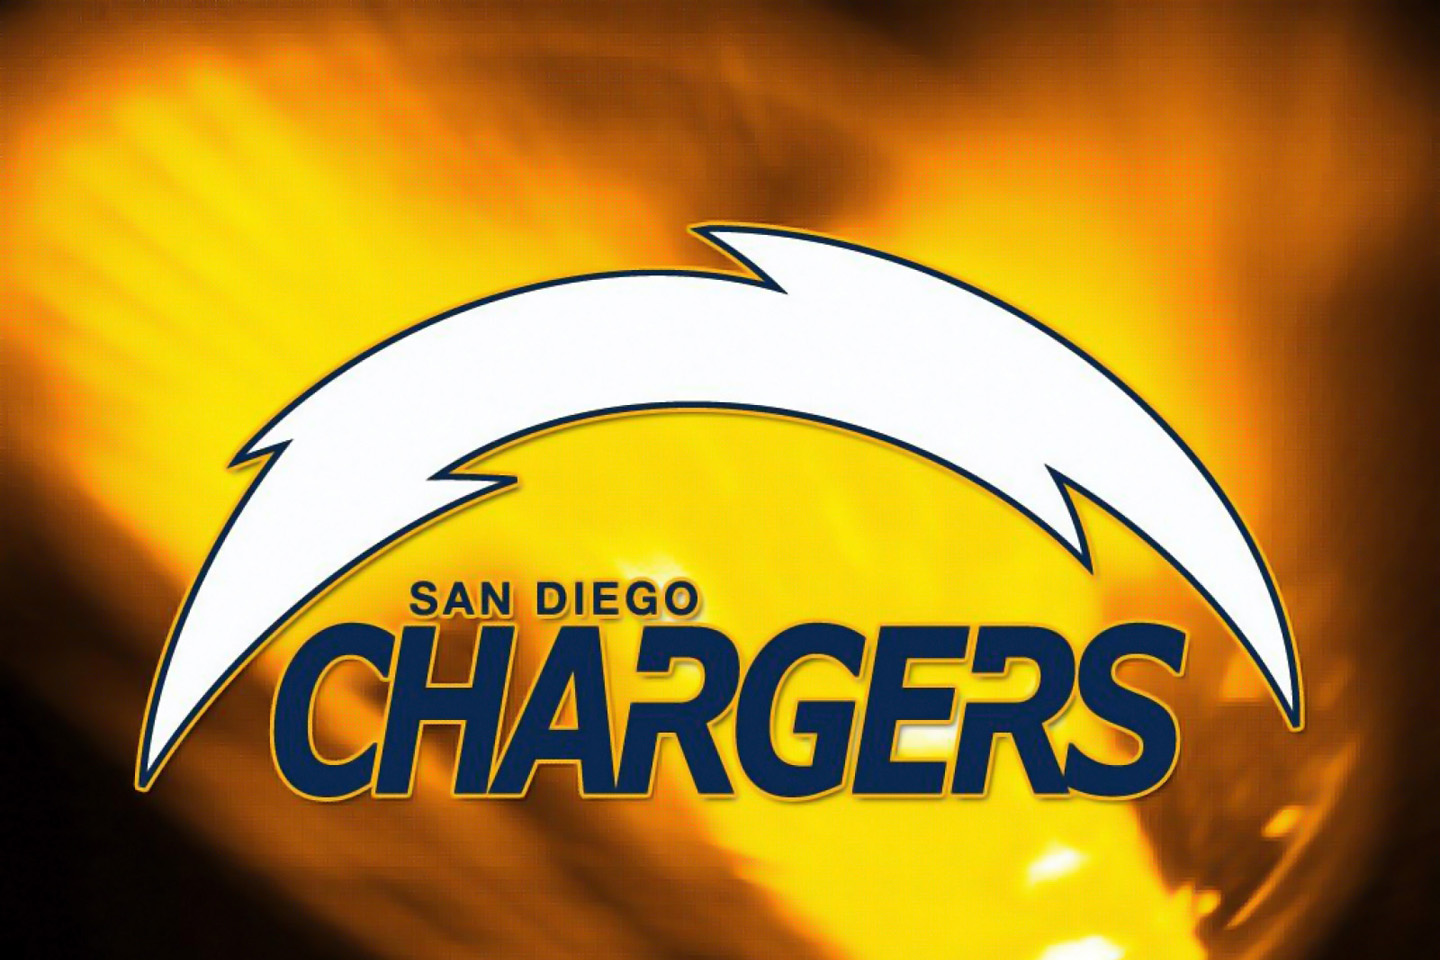 San Diego Chargers Wallpapers   1440x960   327059